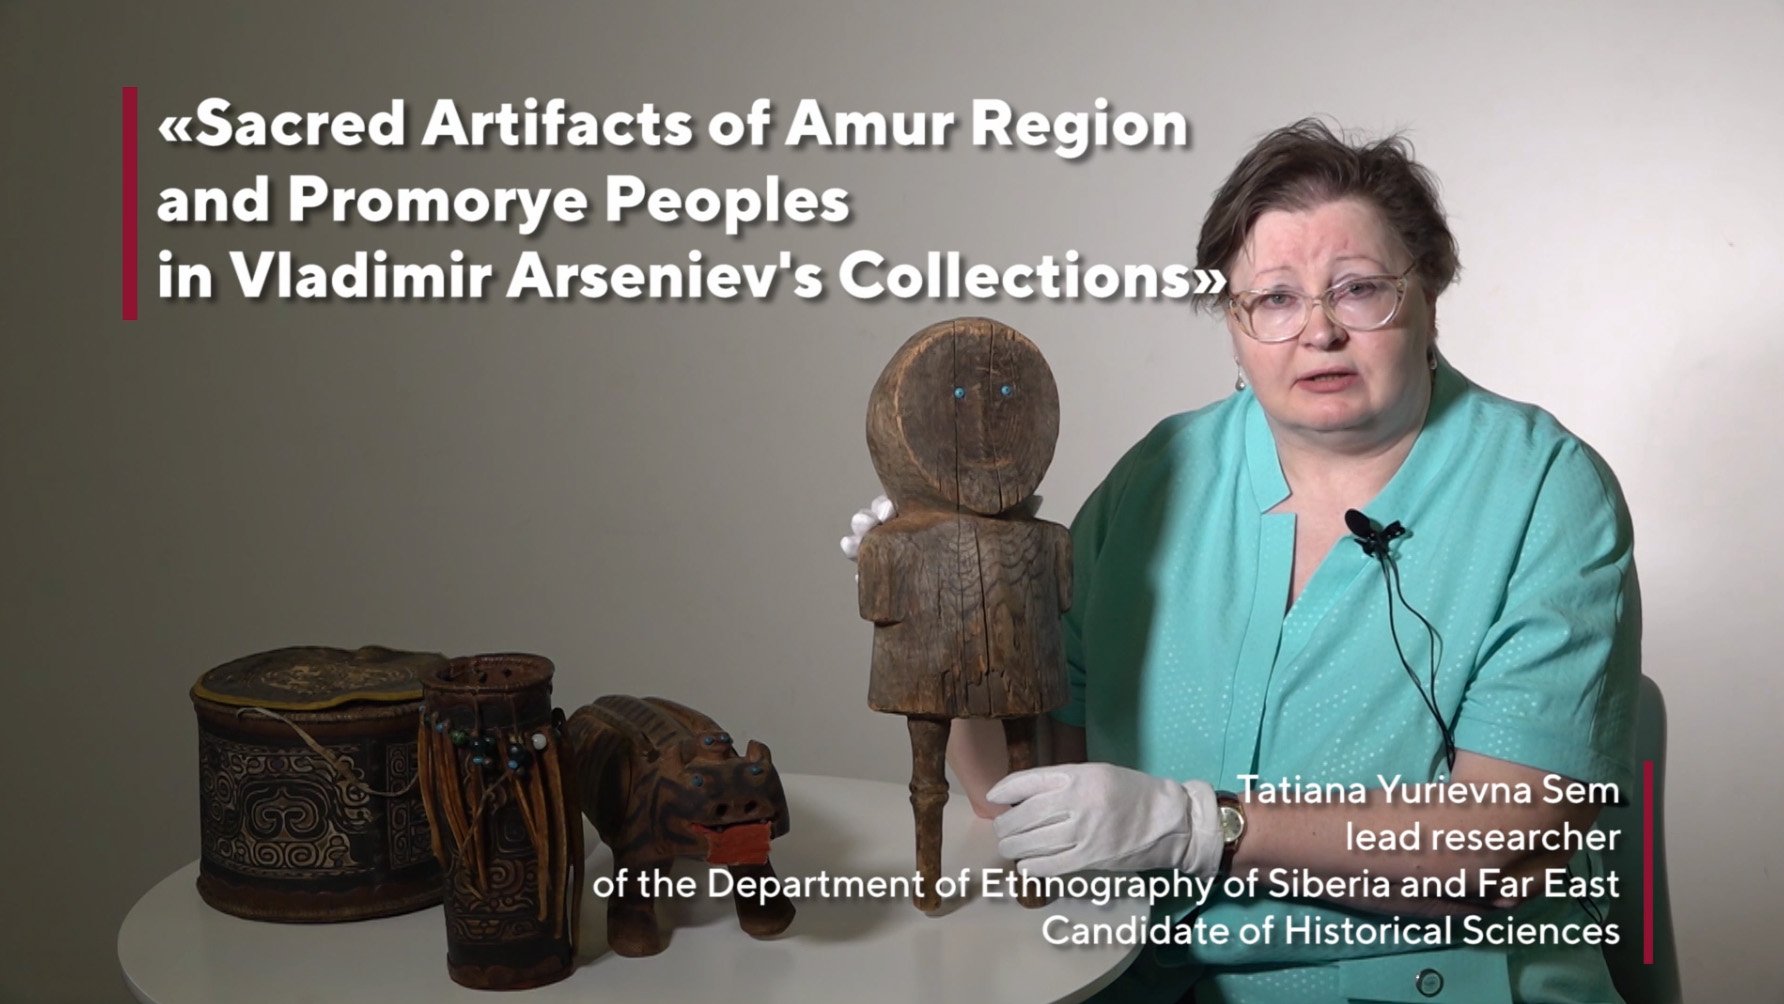 "Sacred Artifacts of Amur Region and Promorye Peoples in Vladimir Arseniev's Collections". Sem T.Y.